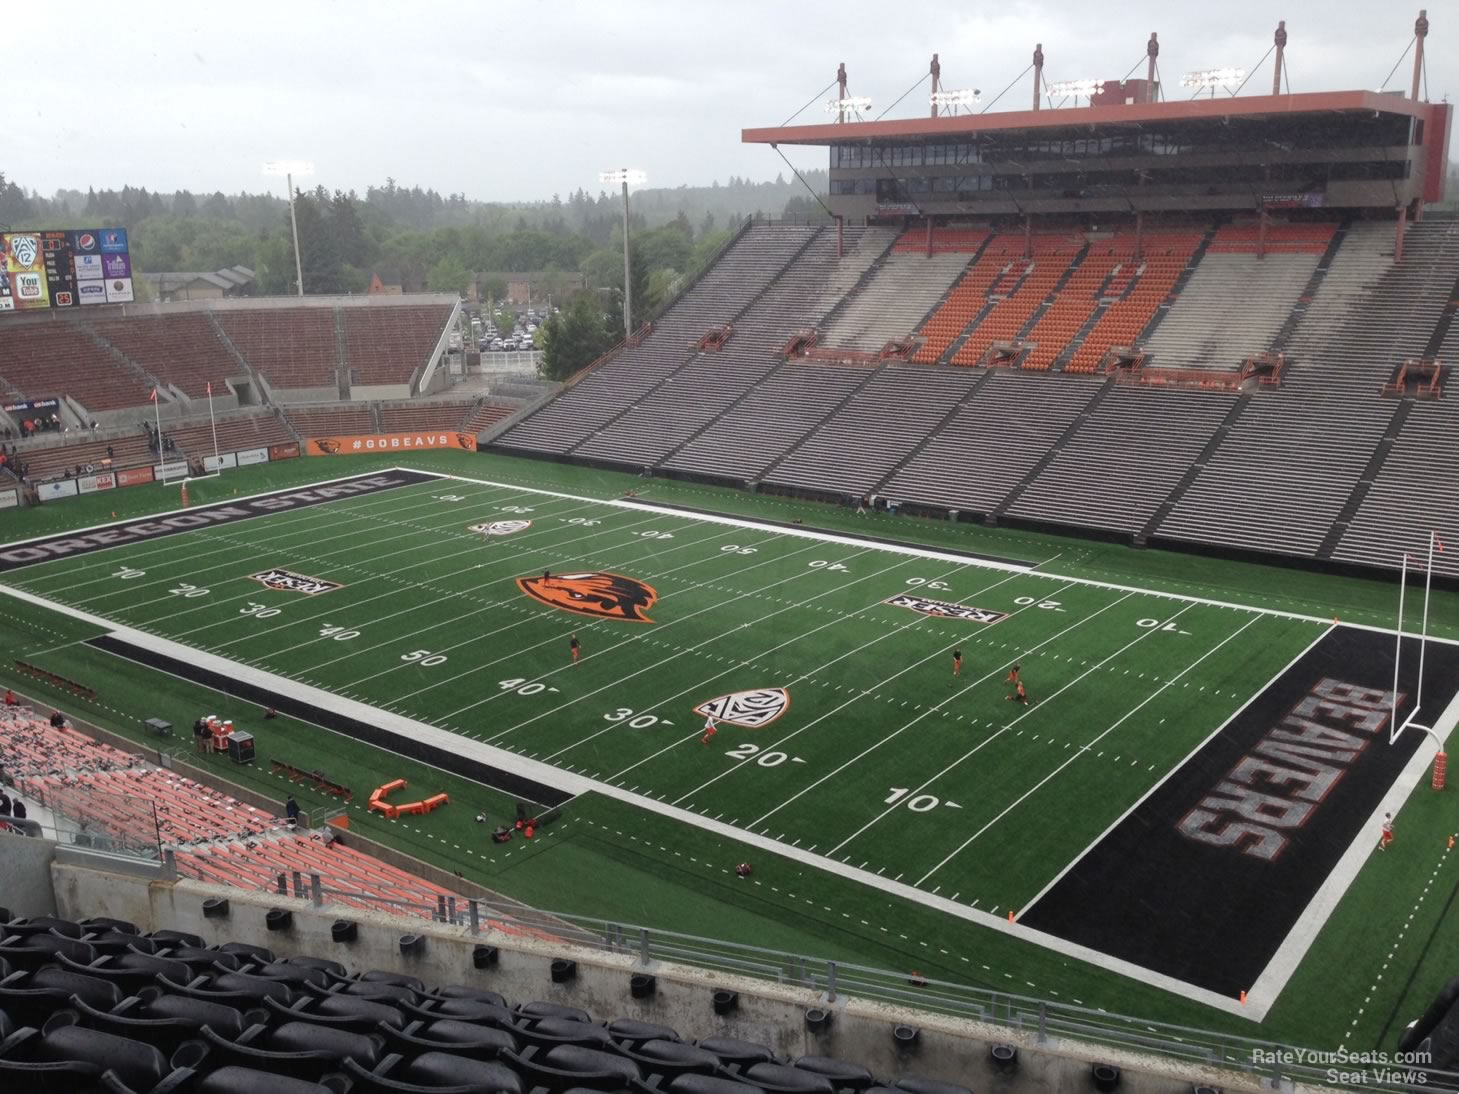 section 213, row 16 seat view  - reser stadium